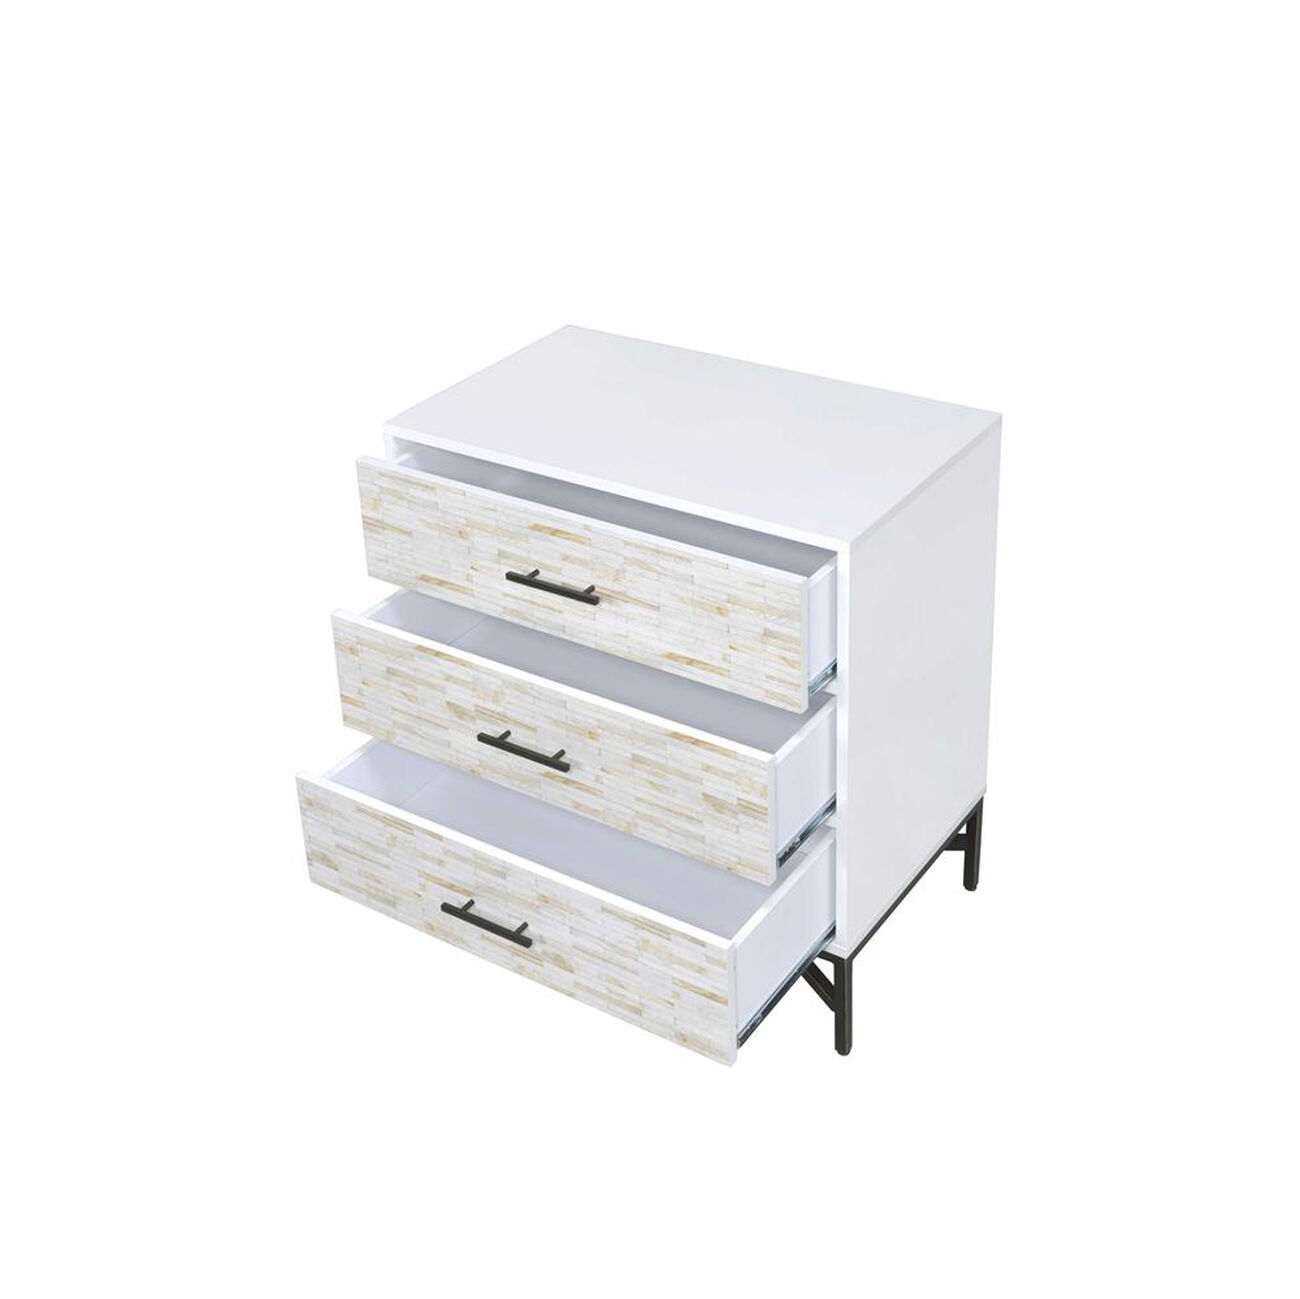 Patterned Three Drawers Wooden Console Table with Metal Base, White & Black